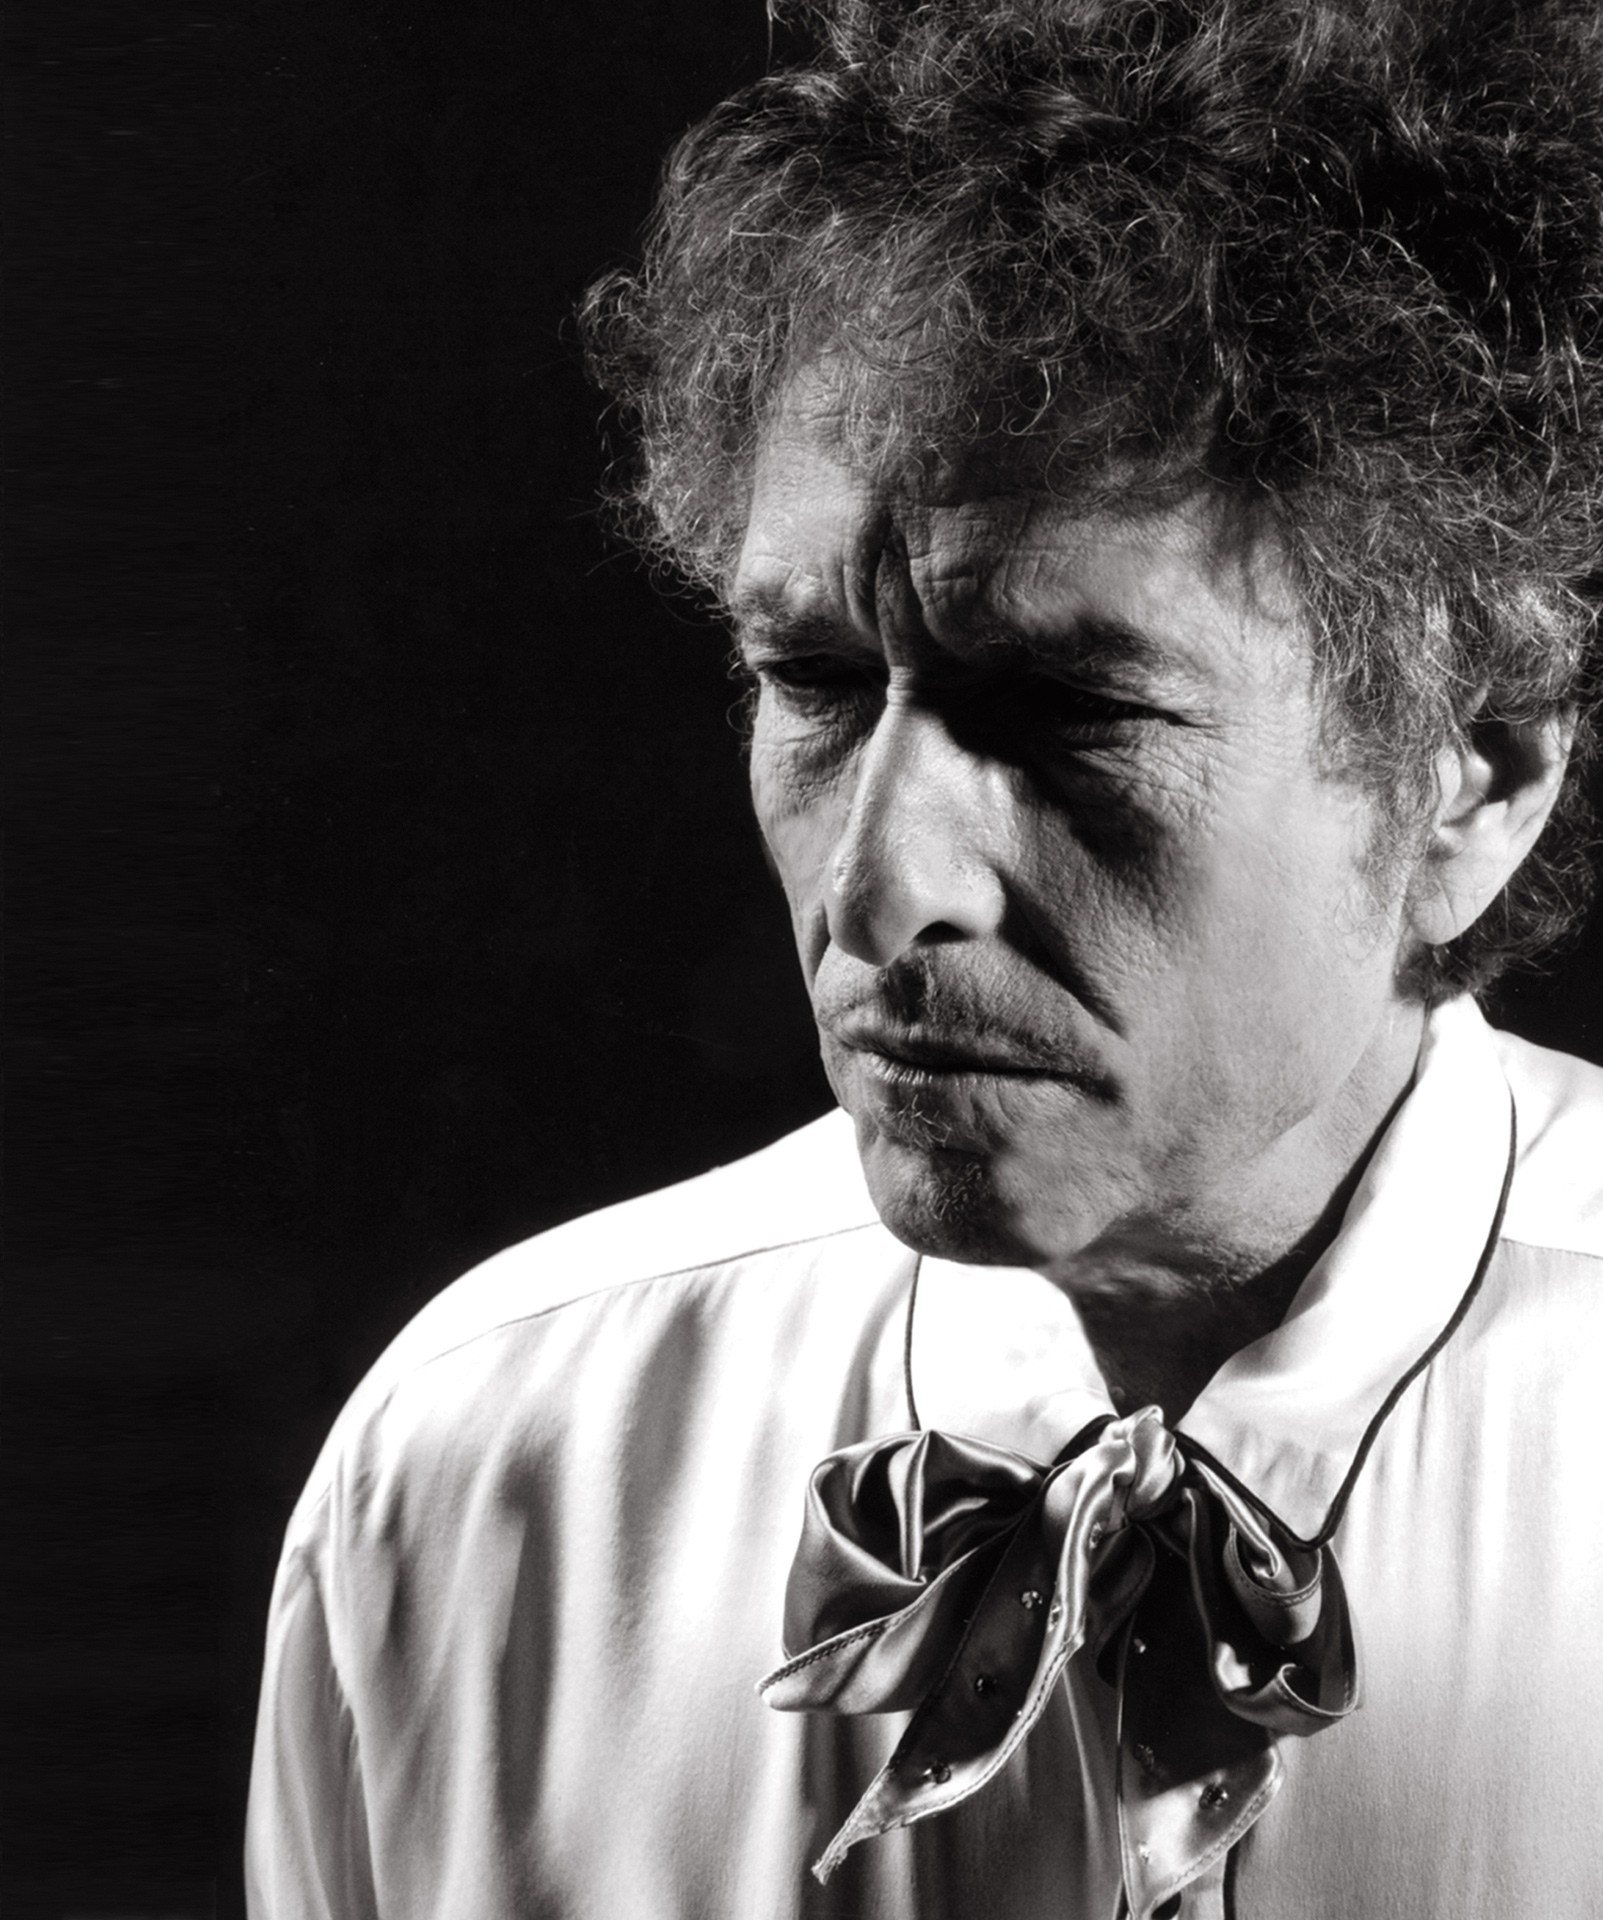 Pondering an age-old question: Is Bob Dylan terrible in concert